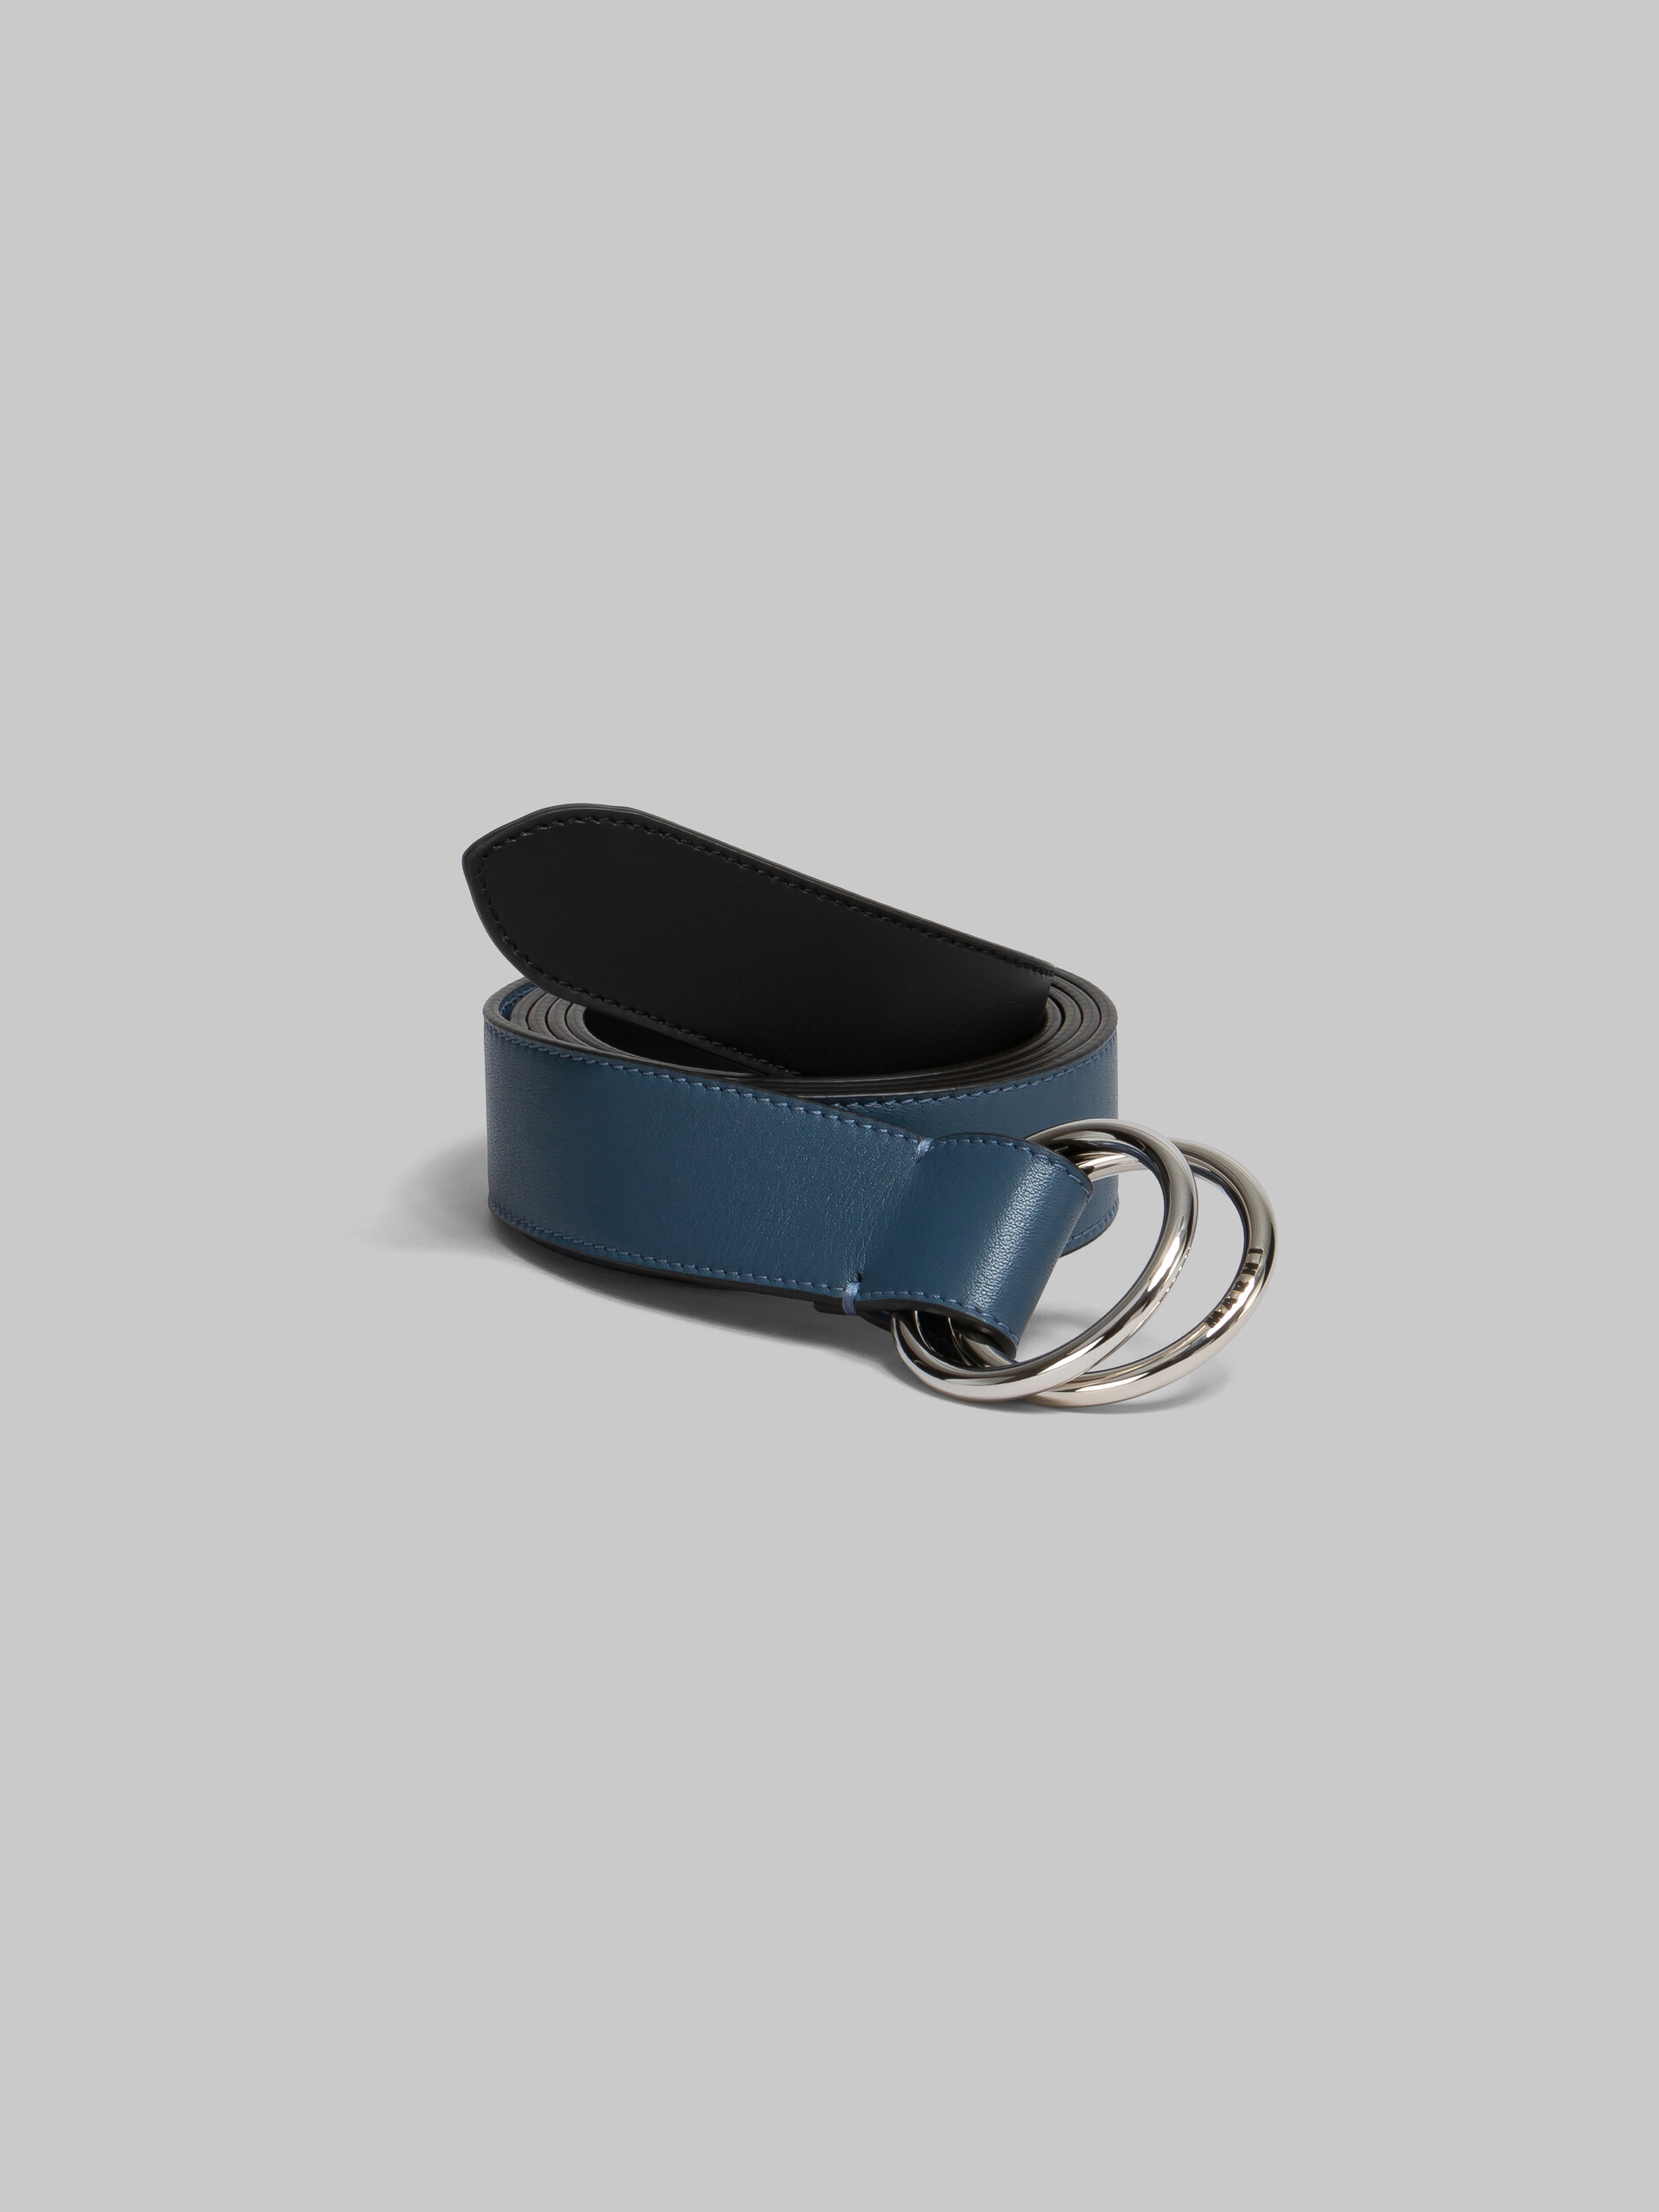 Black and blue leather belt with ring buckle - Belts - Image 2